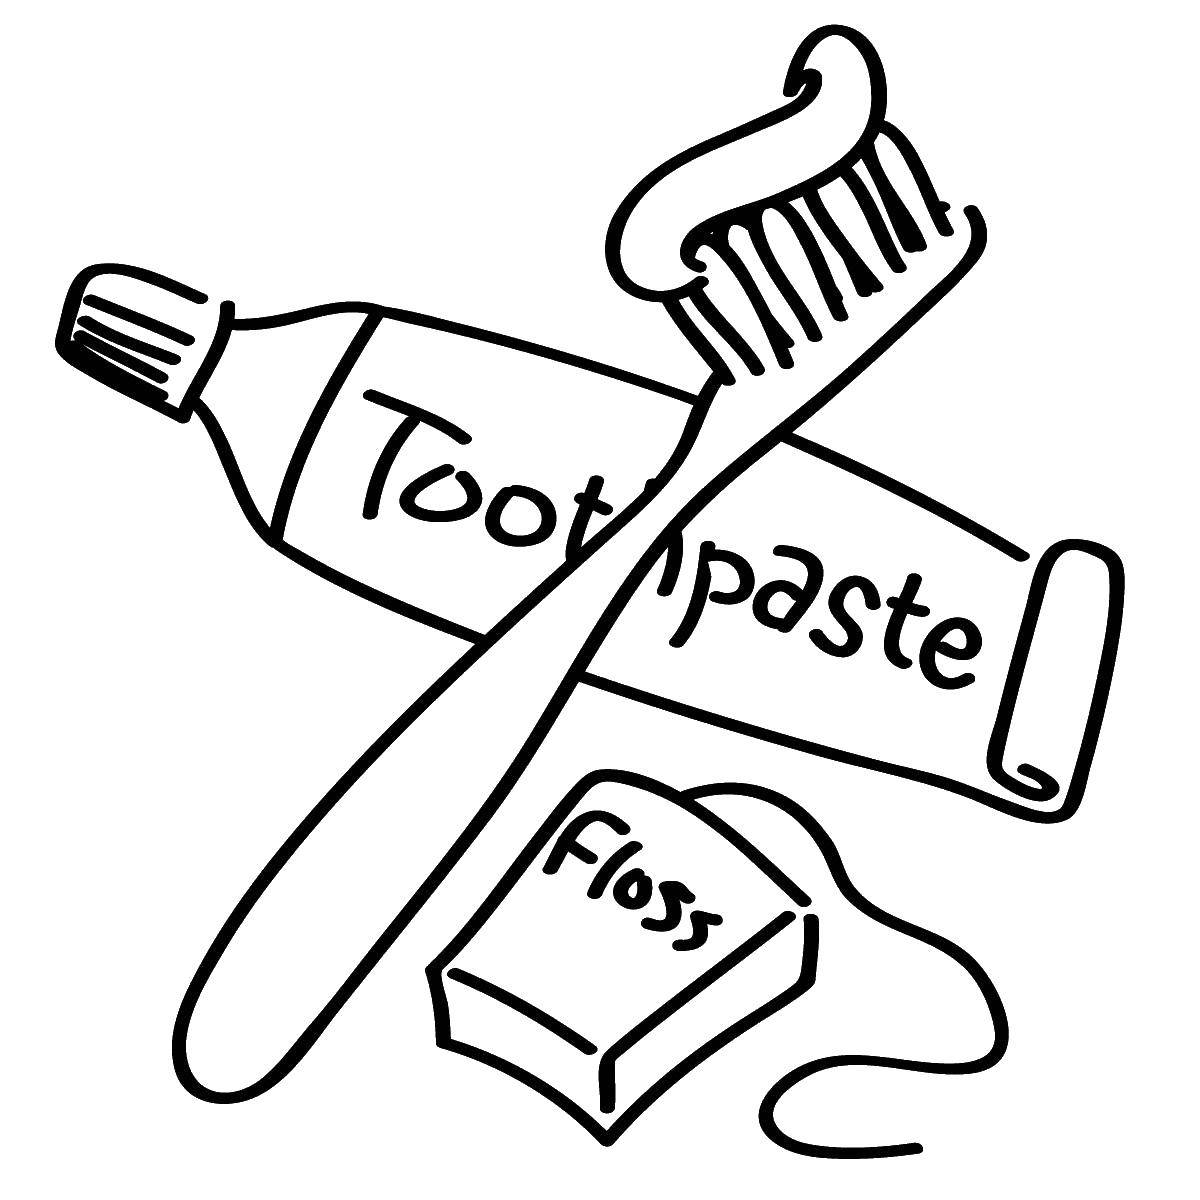 Coloring Toothpaste and brush. Category The care of teeth. Tags:  toothpaste, brush.